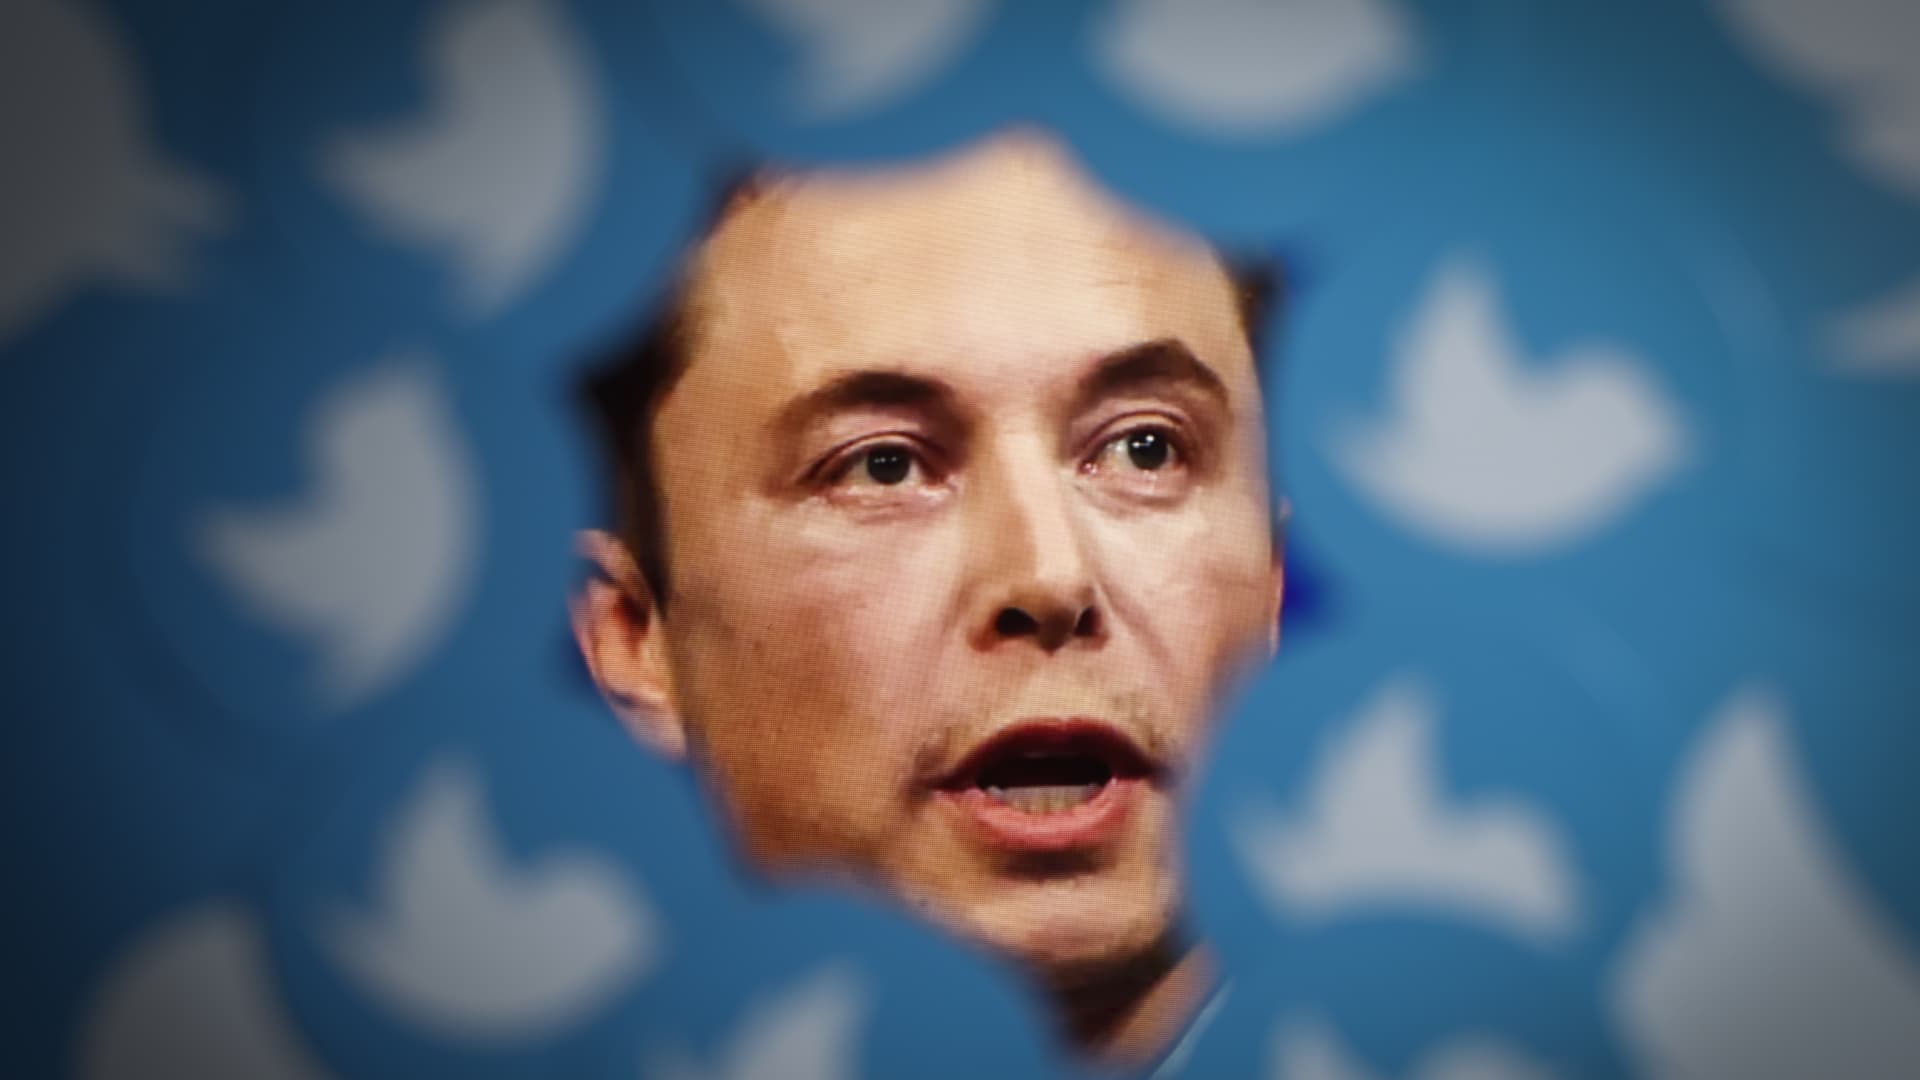 SpaceX, Tesla, and Boring Company execs helping Musk at Twitter